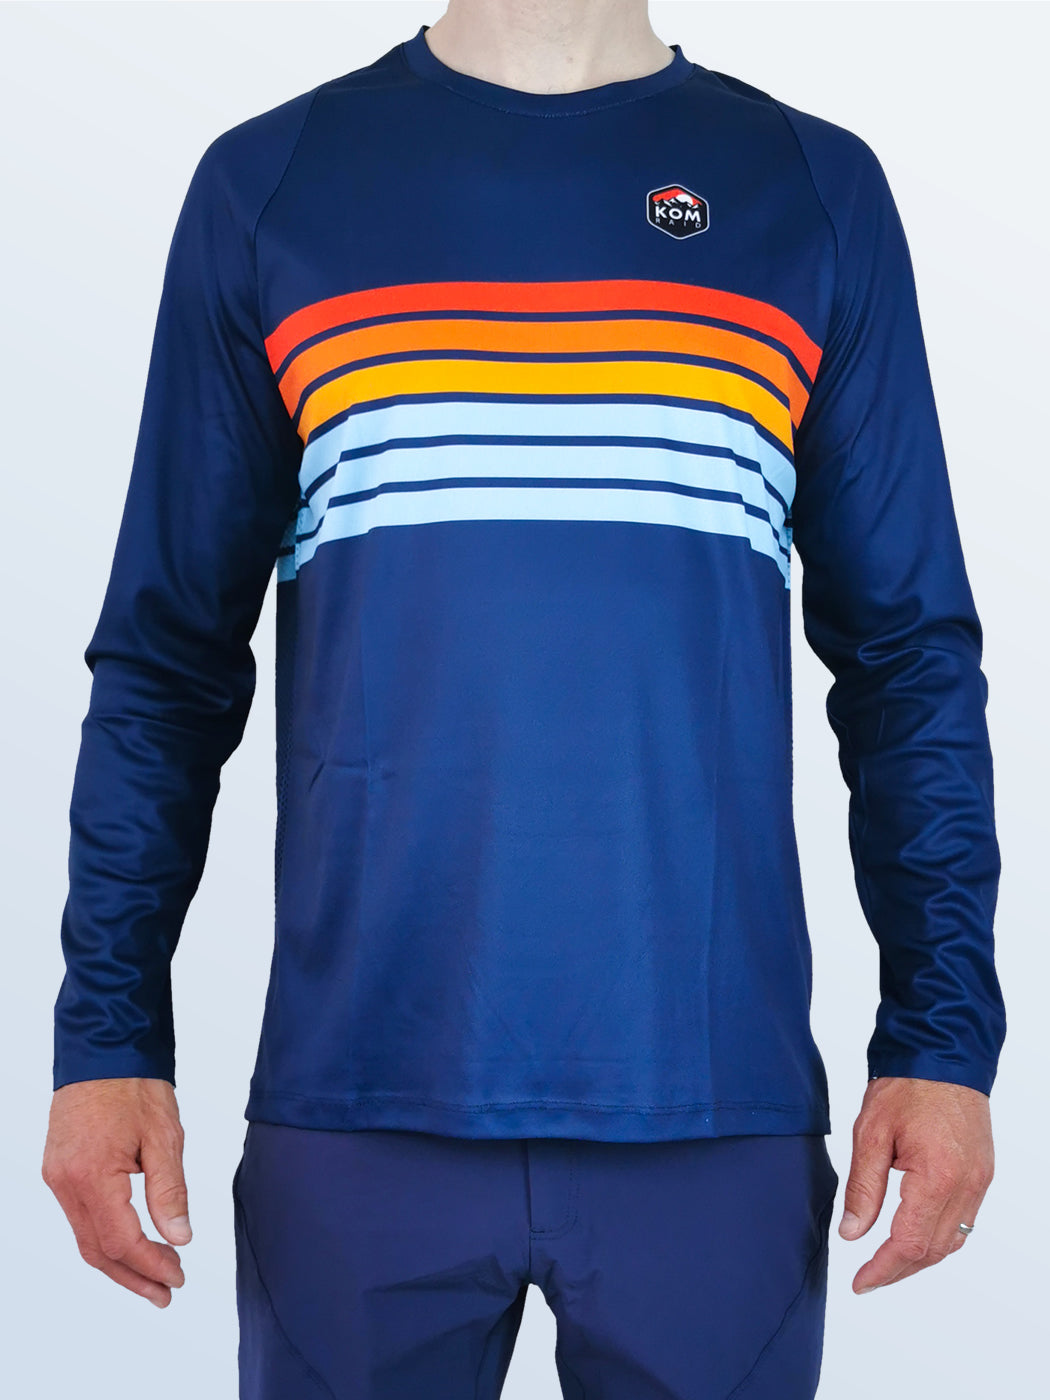 Whistler Grit Off-Road Jersey